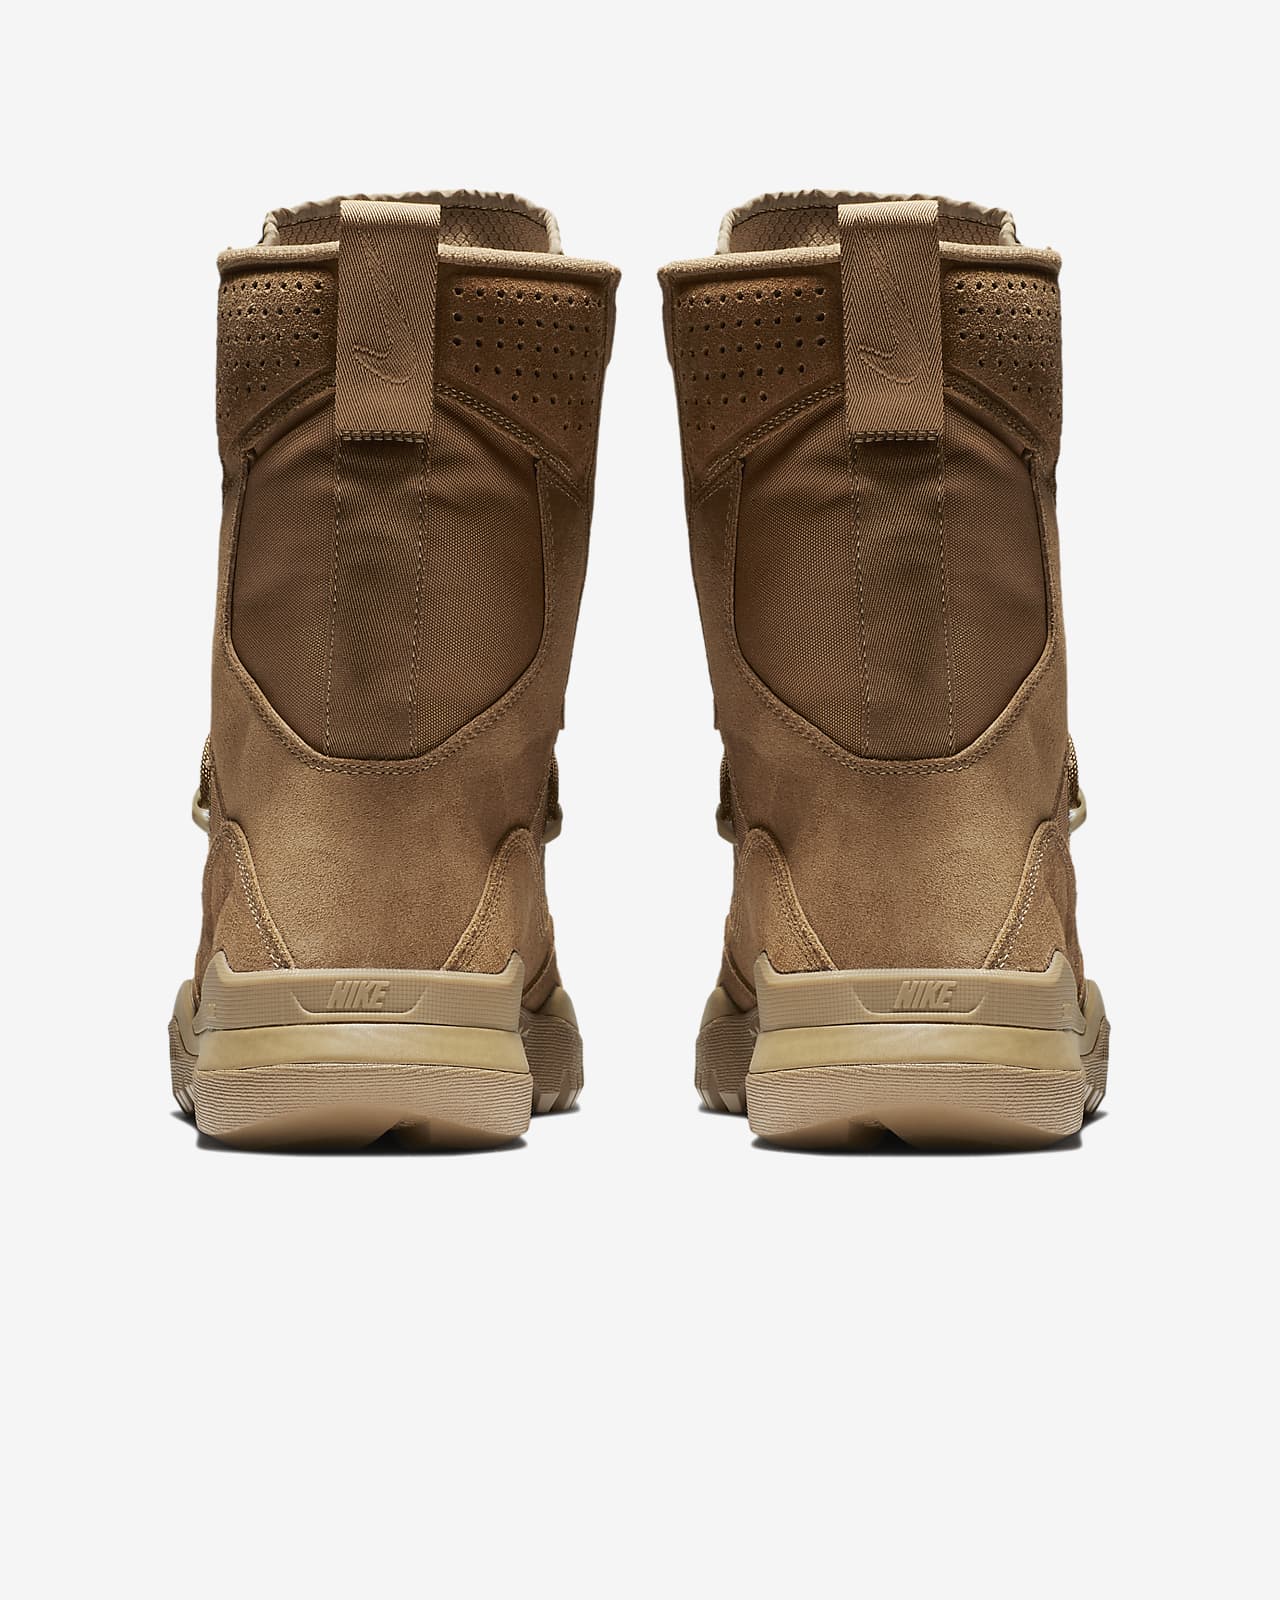 nike sfb boots coyote brown